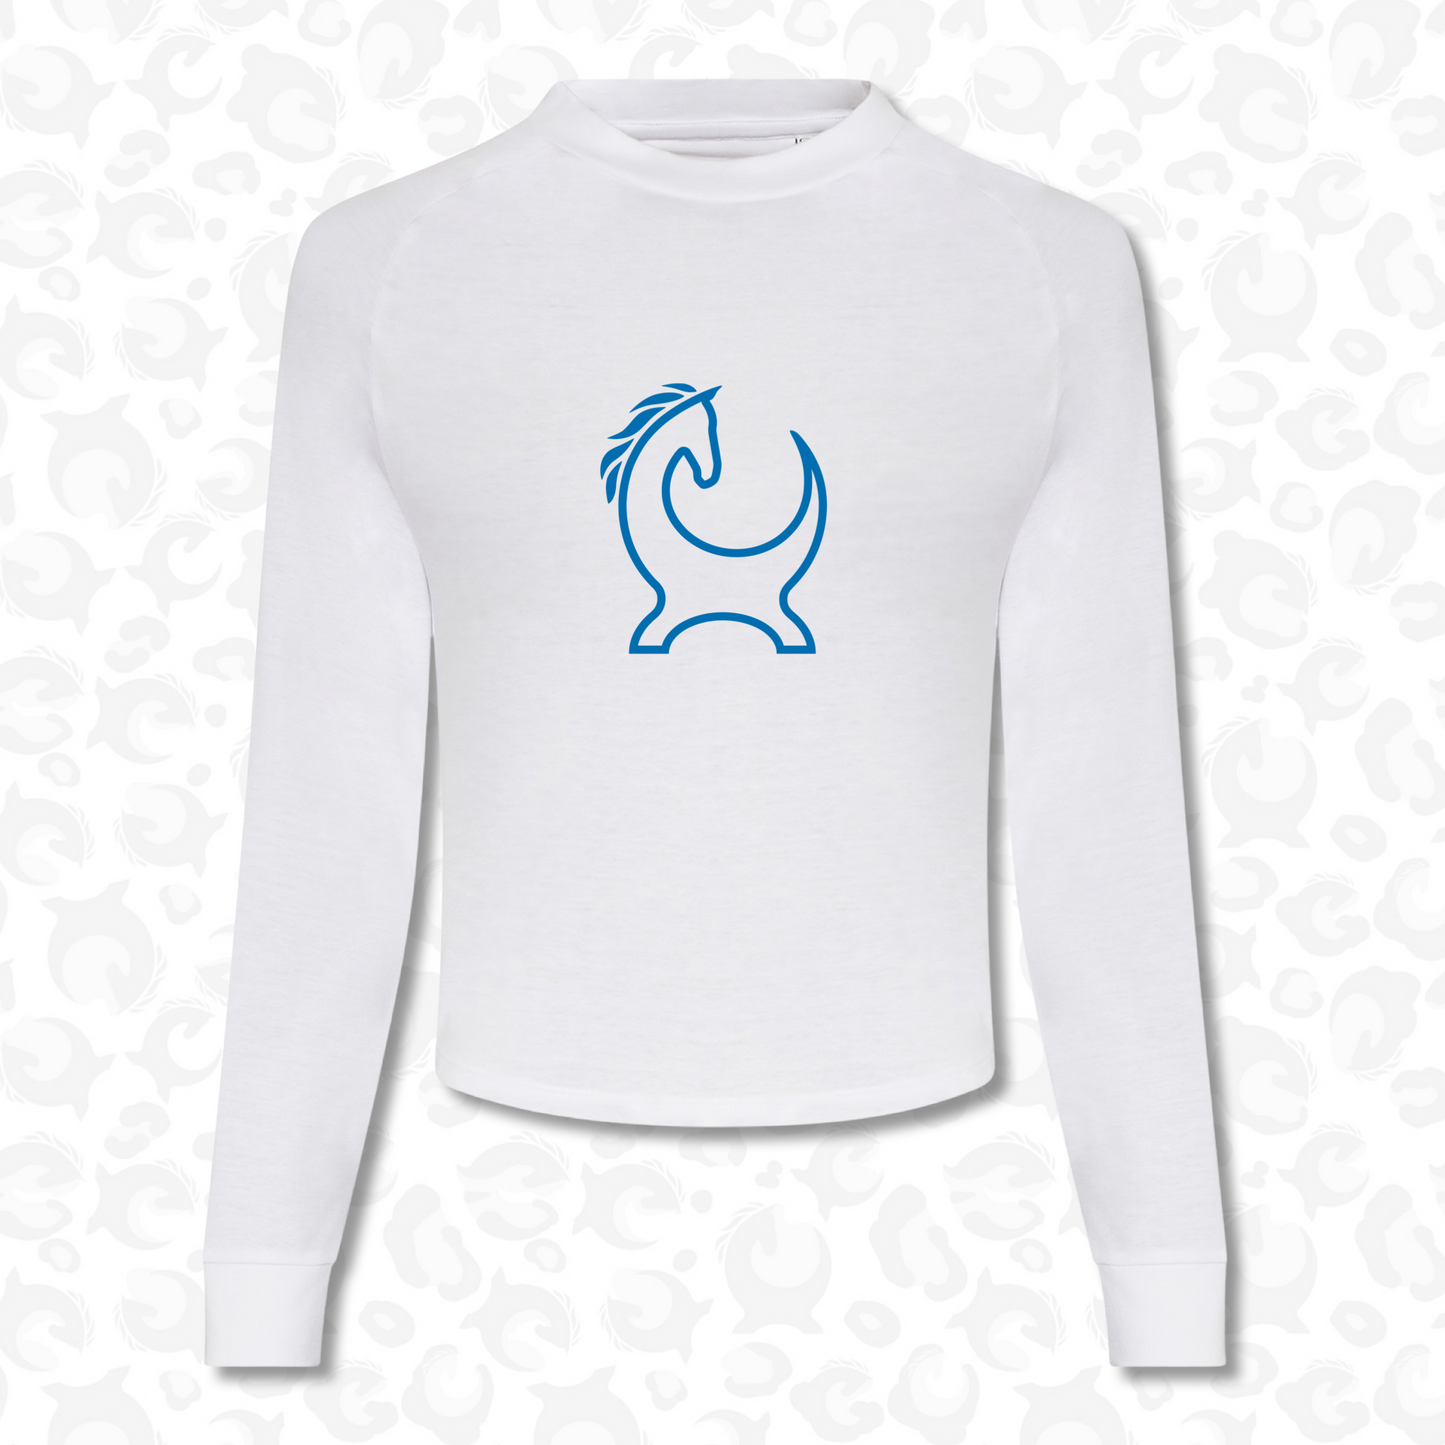 Crossover Top - White/Blue